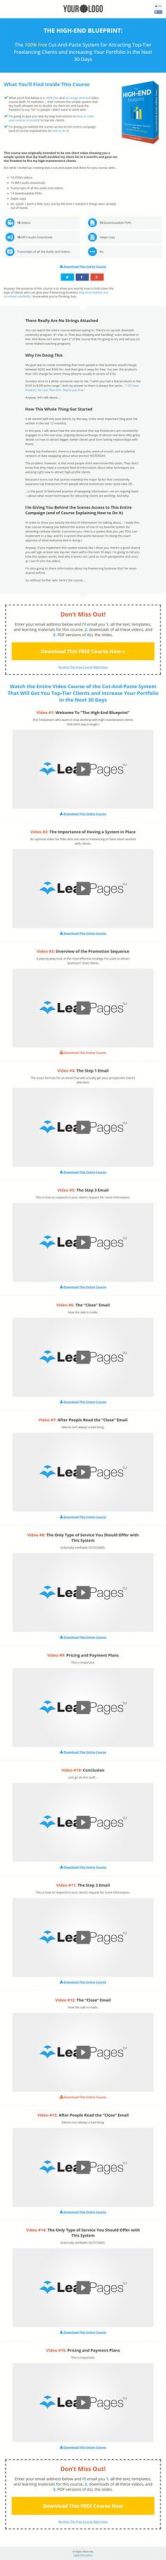 591ba9a1ce9785ceae5f1326bbe7262c page template templates